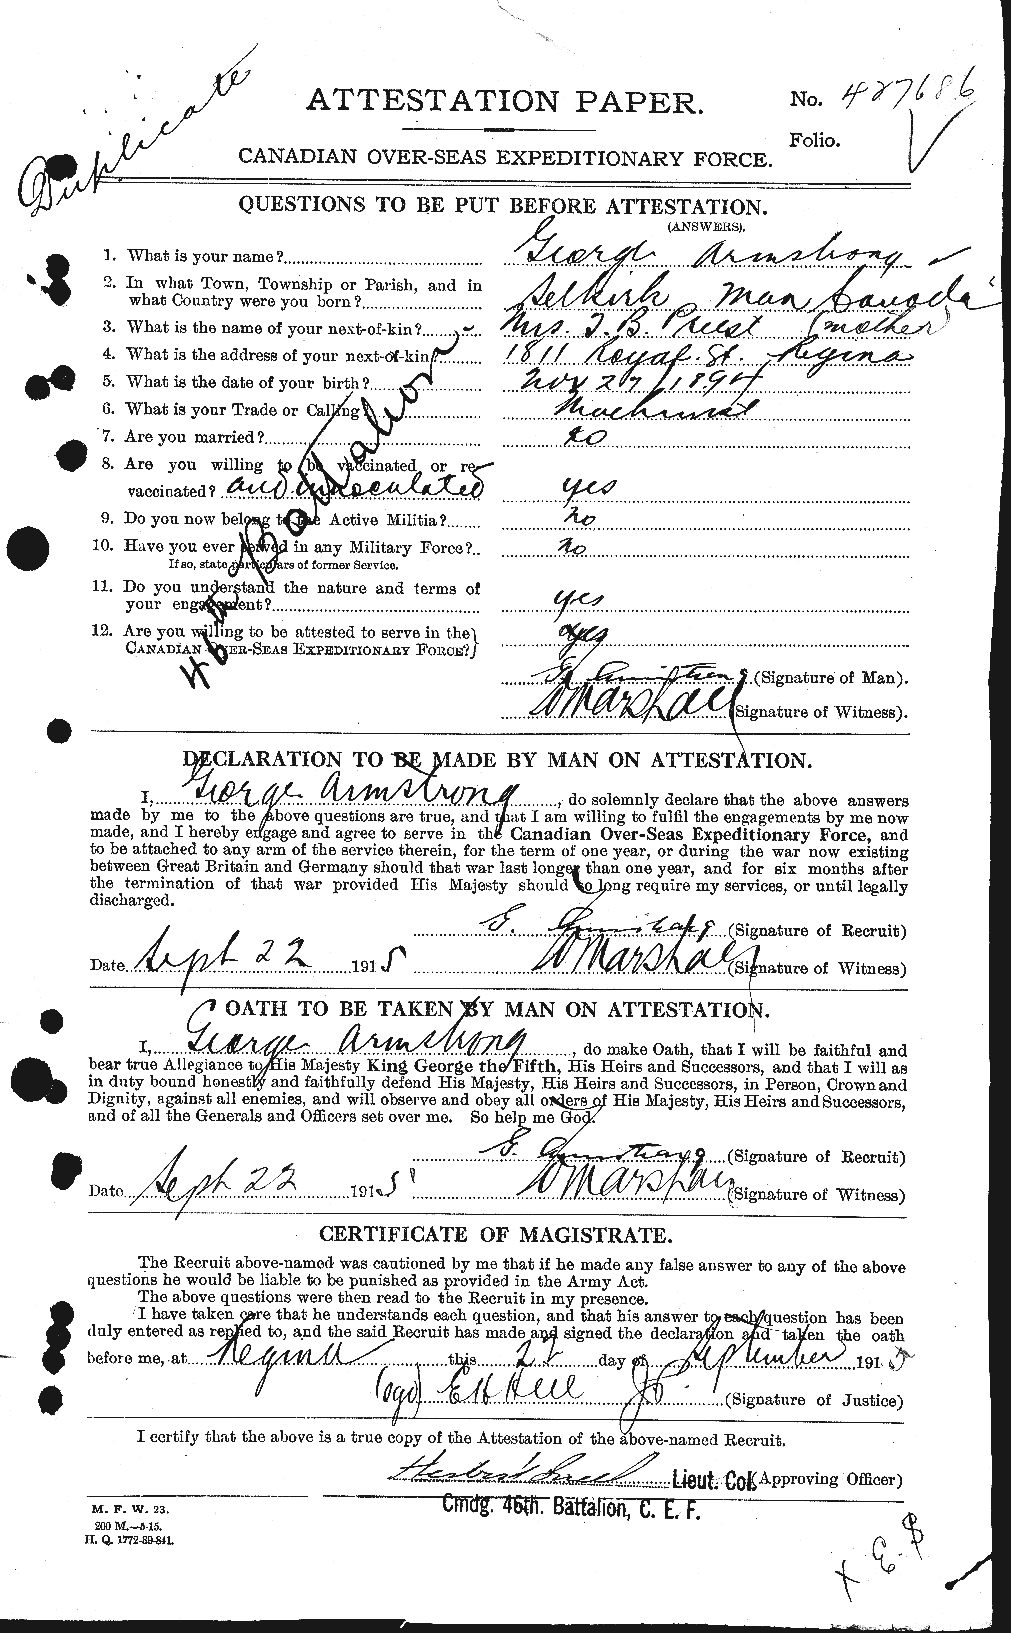 Personnel Records of the First World War - CEF 213738a